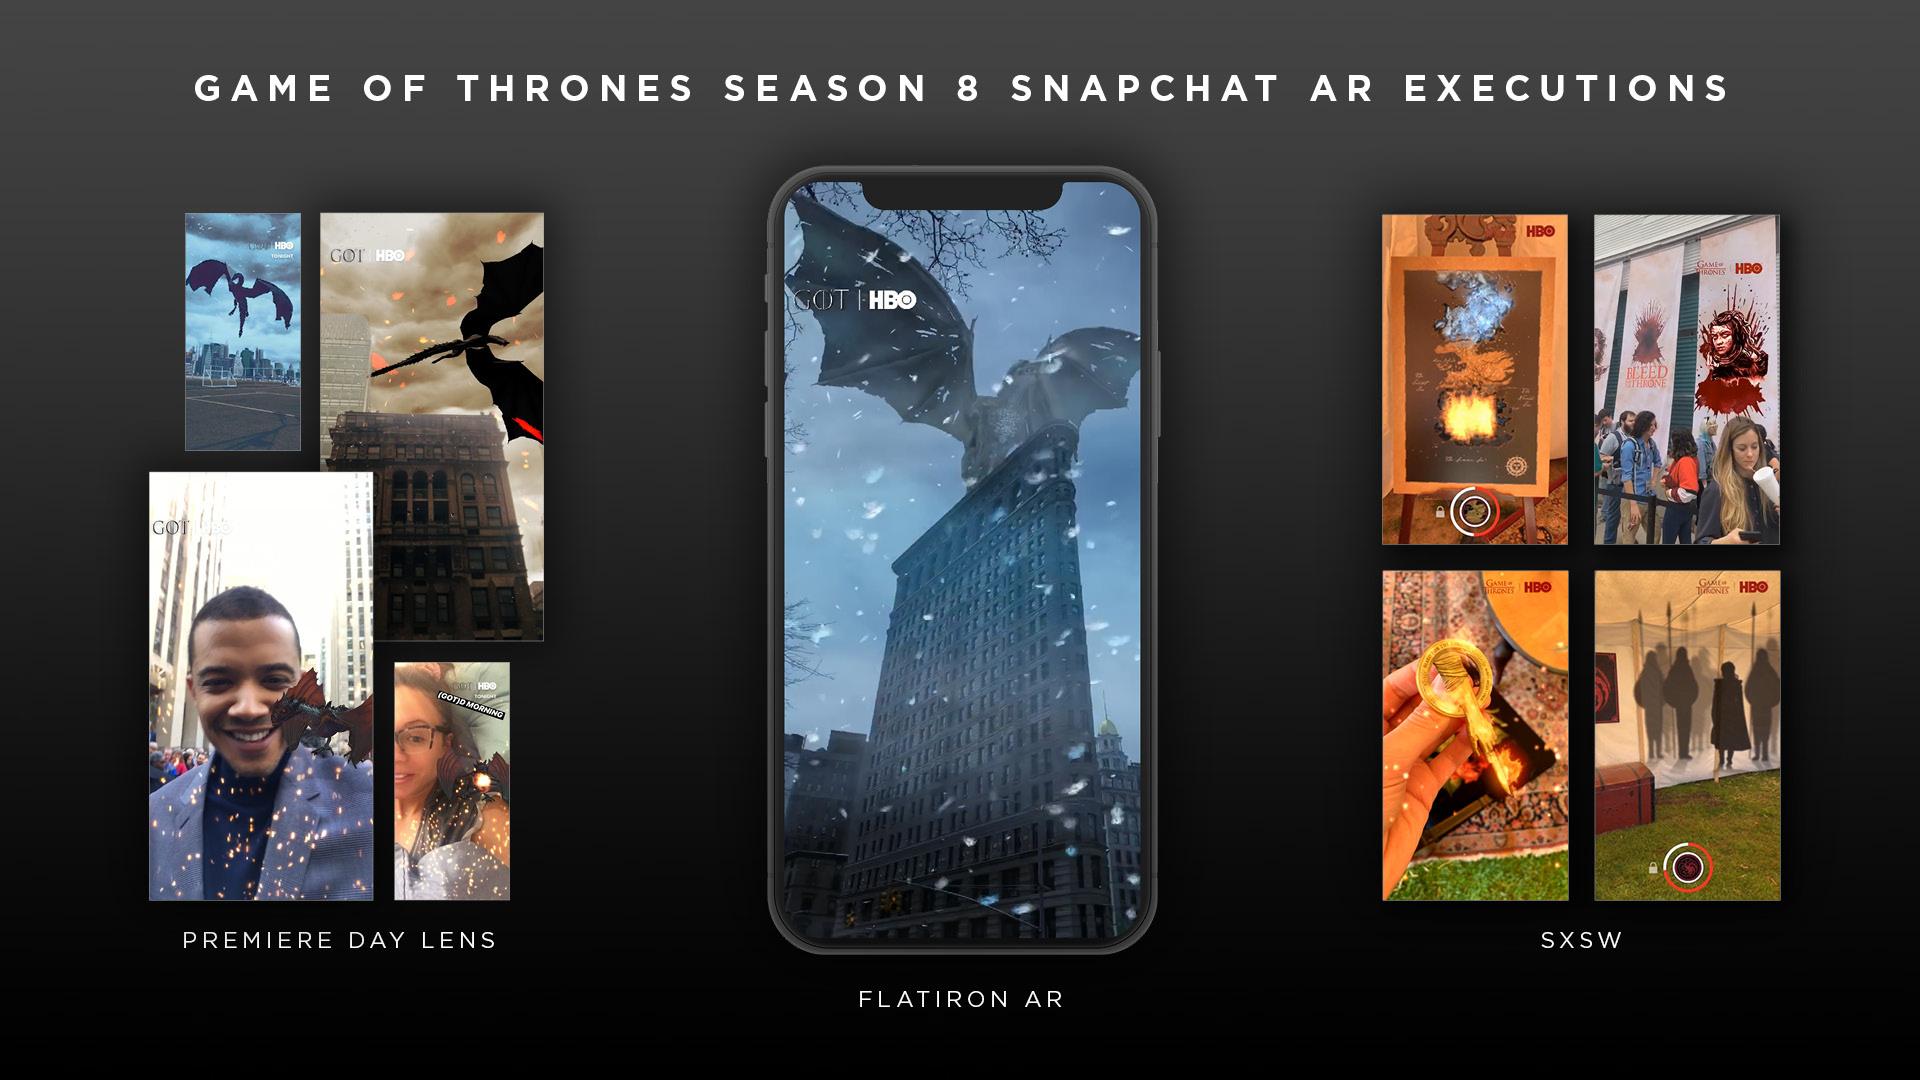 Seattle Software Developers | Snapchat and HBO Bring Game of Thrones to Life at SXSW Part 6 | Snapchat HBO